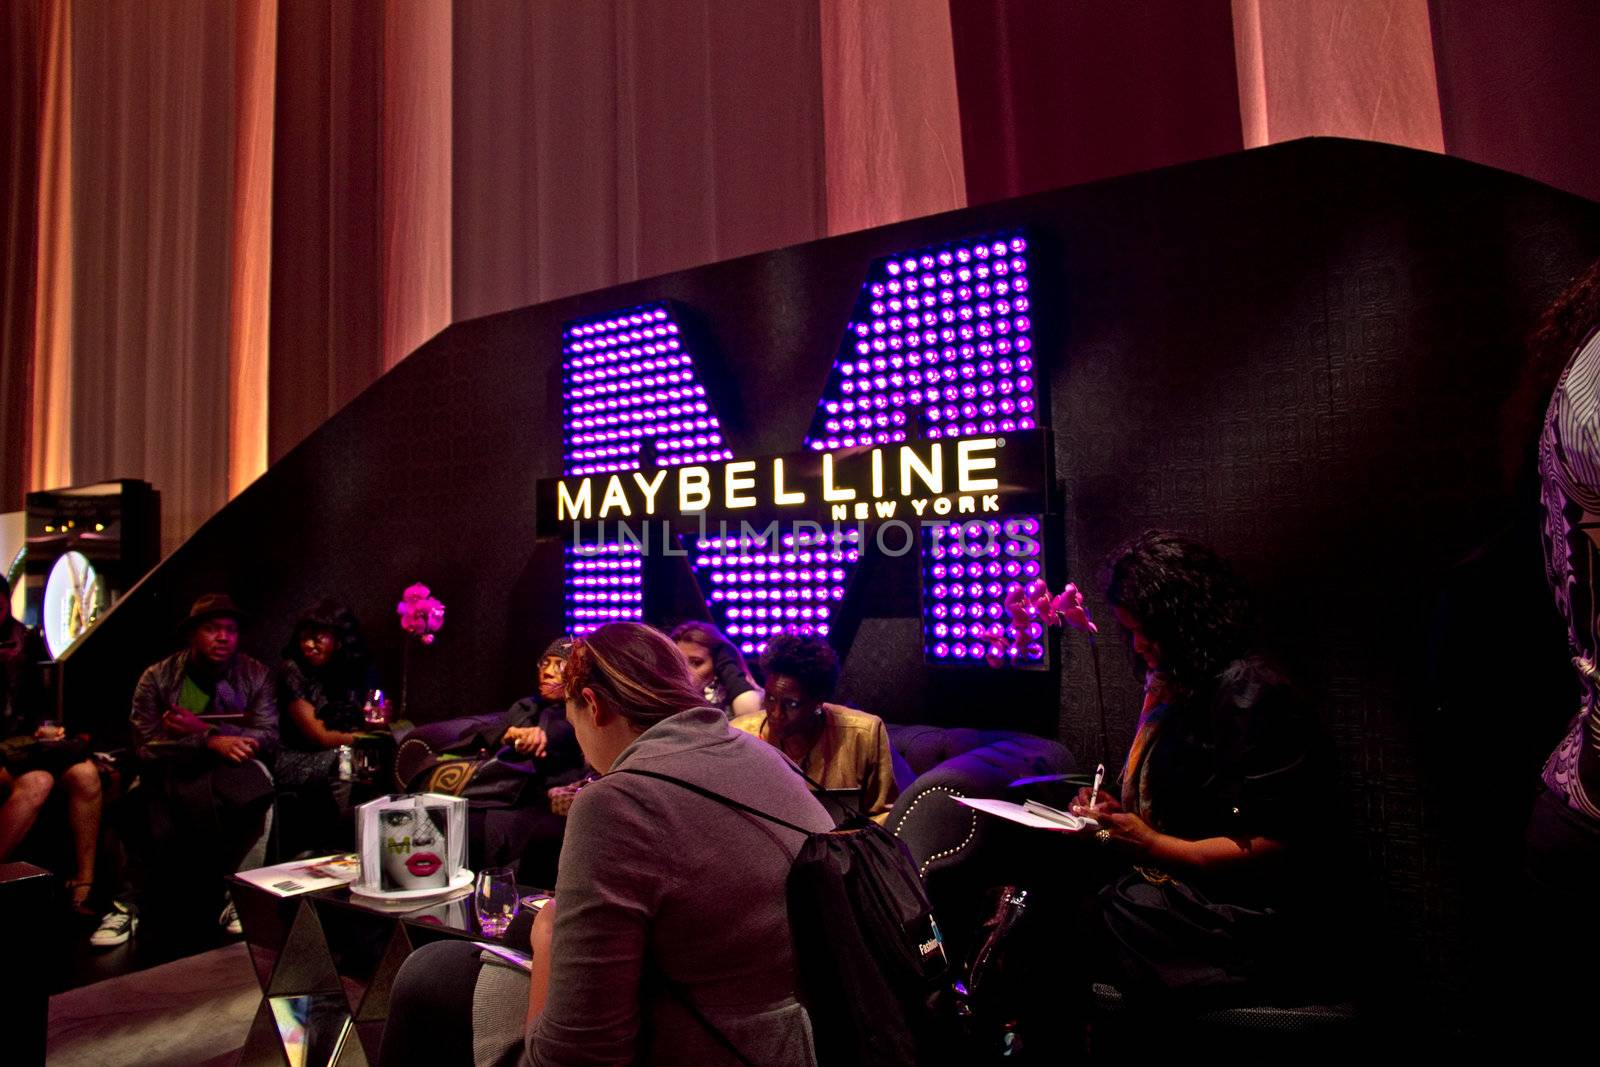 Maybelline Display at New York Fashion Week 2011 at Lincoln Center by photopro